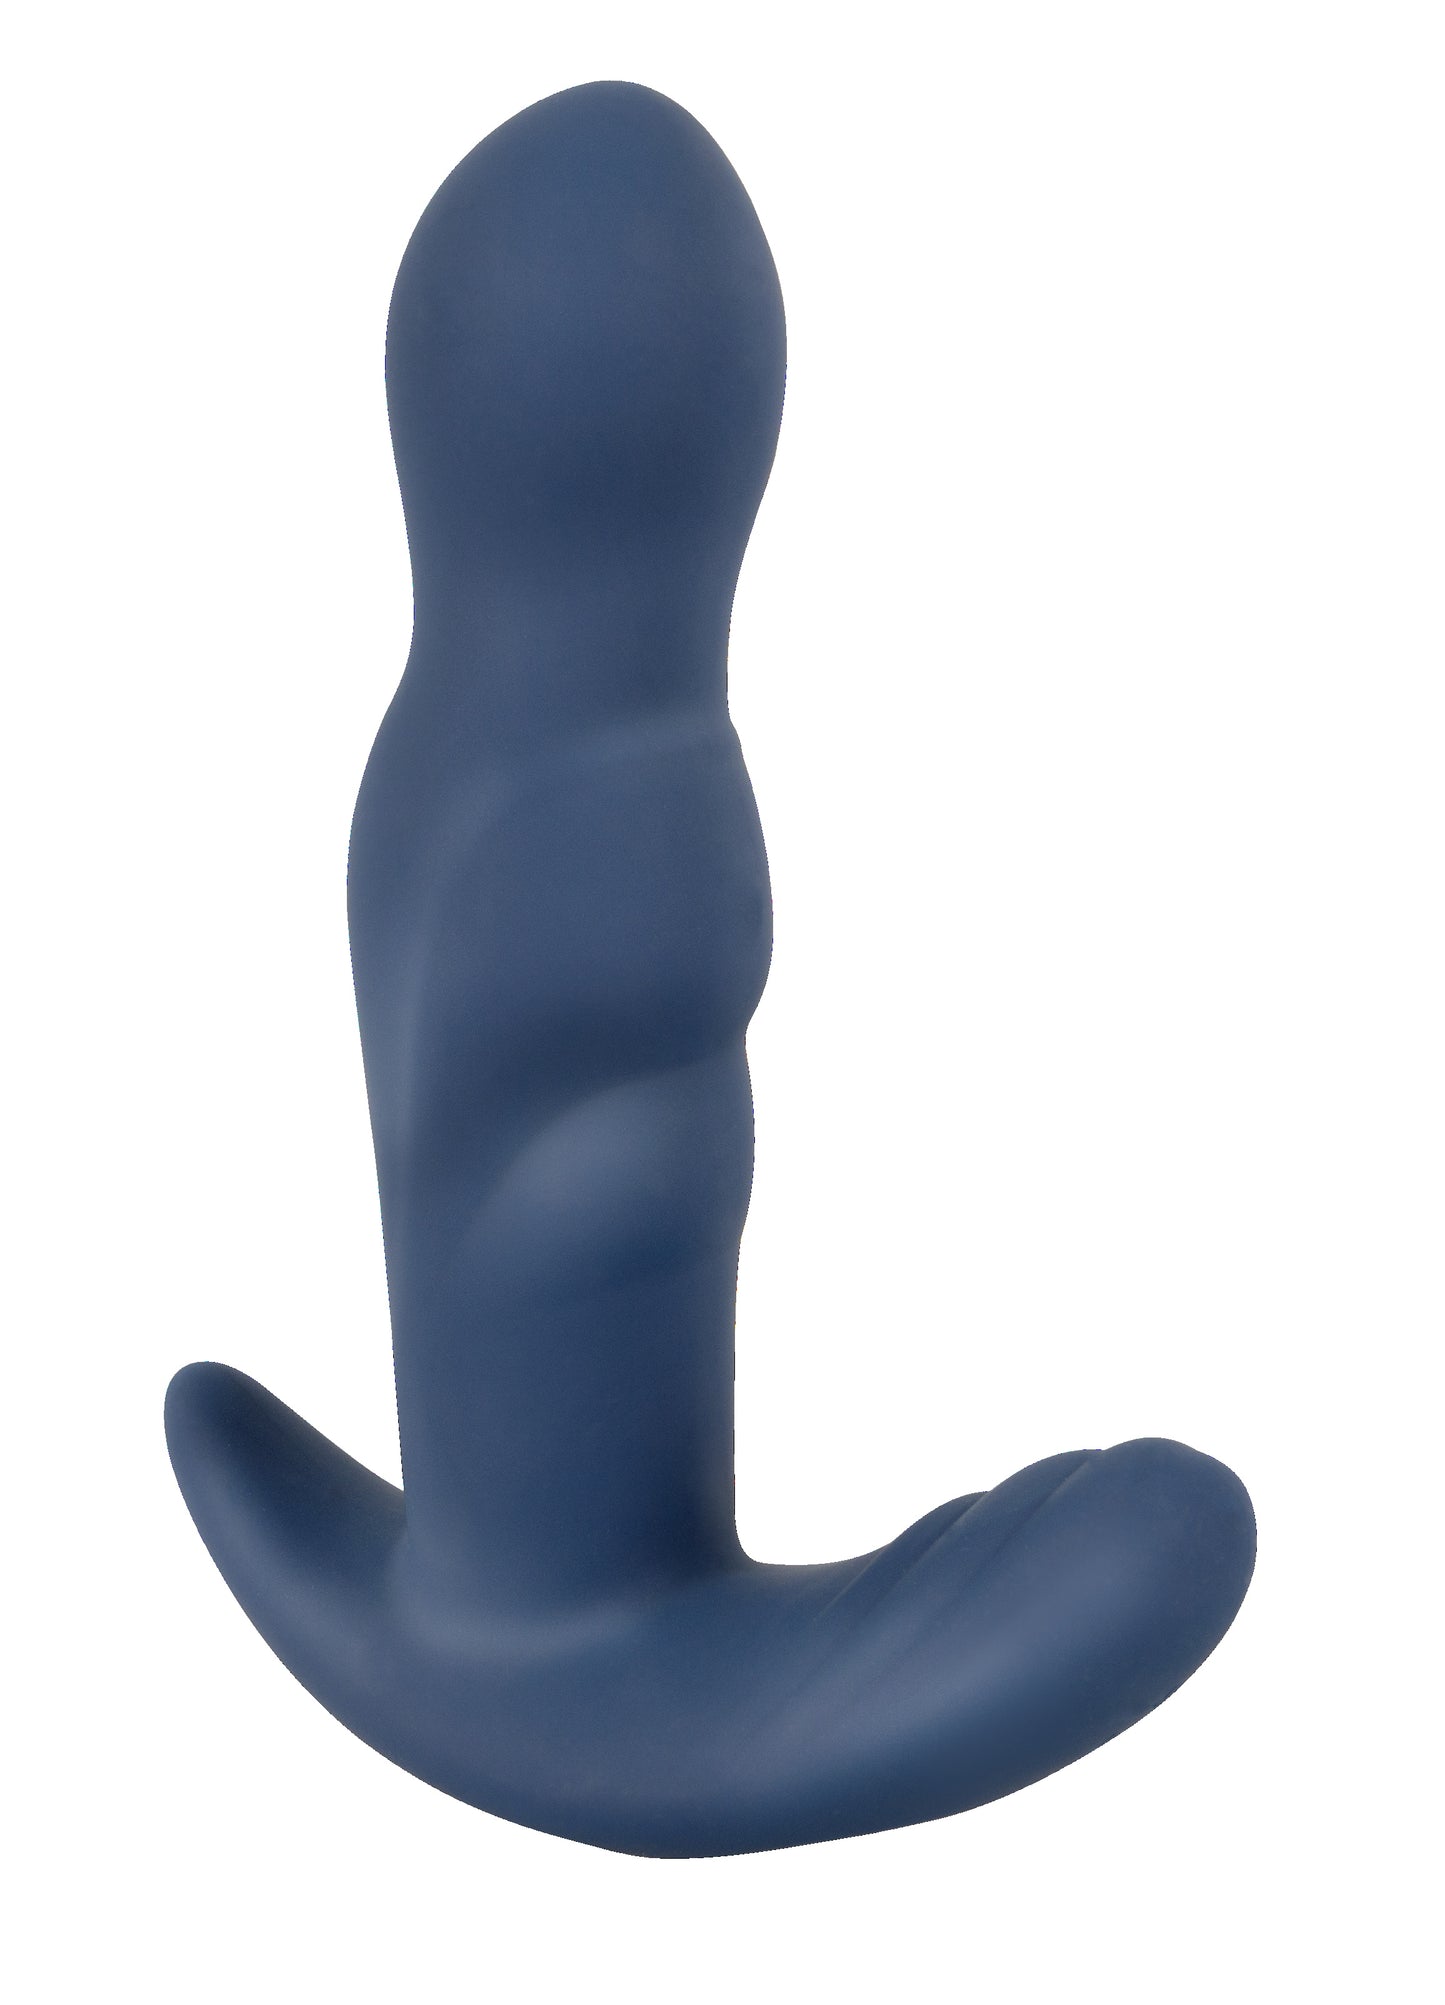 Anos Remote Control Rotating Prostate Plug with Vibration